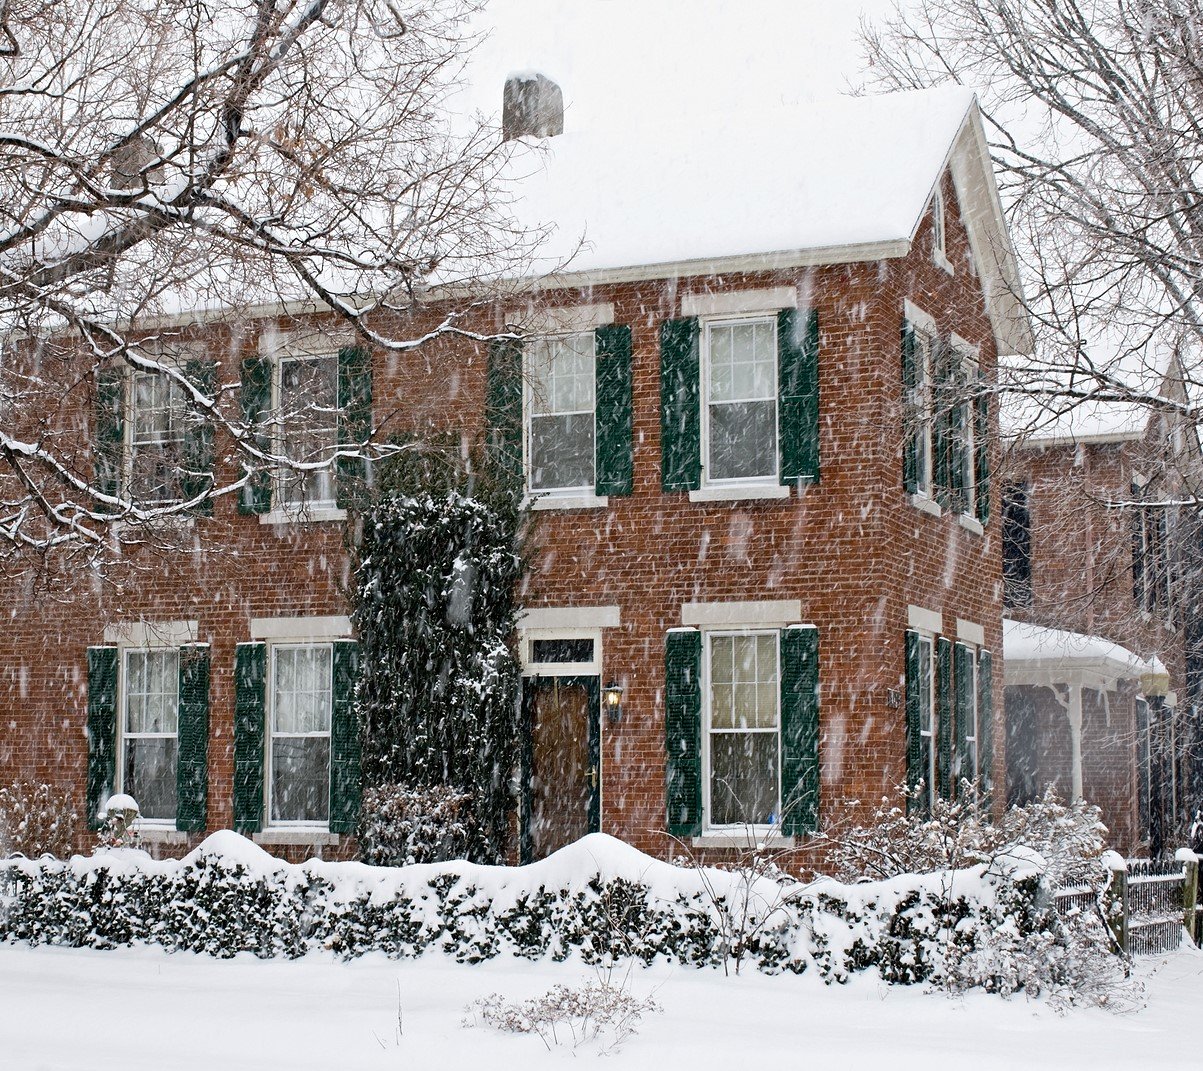 Adverse-Effects-of-Winter-Weather-on-a-Historic-Brick-Home-in-DC-Renaissance-Development-DC